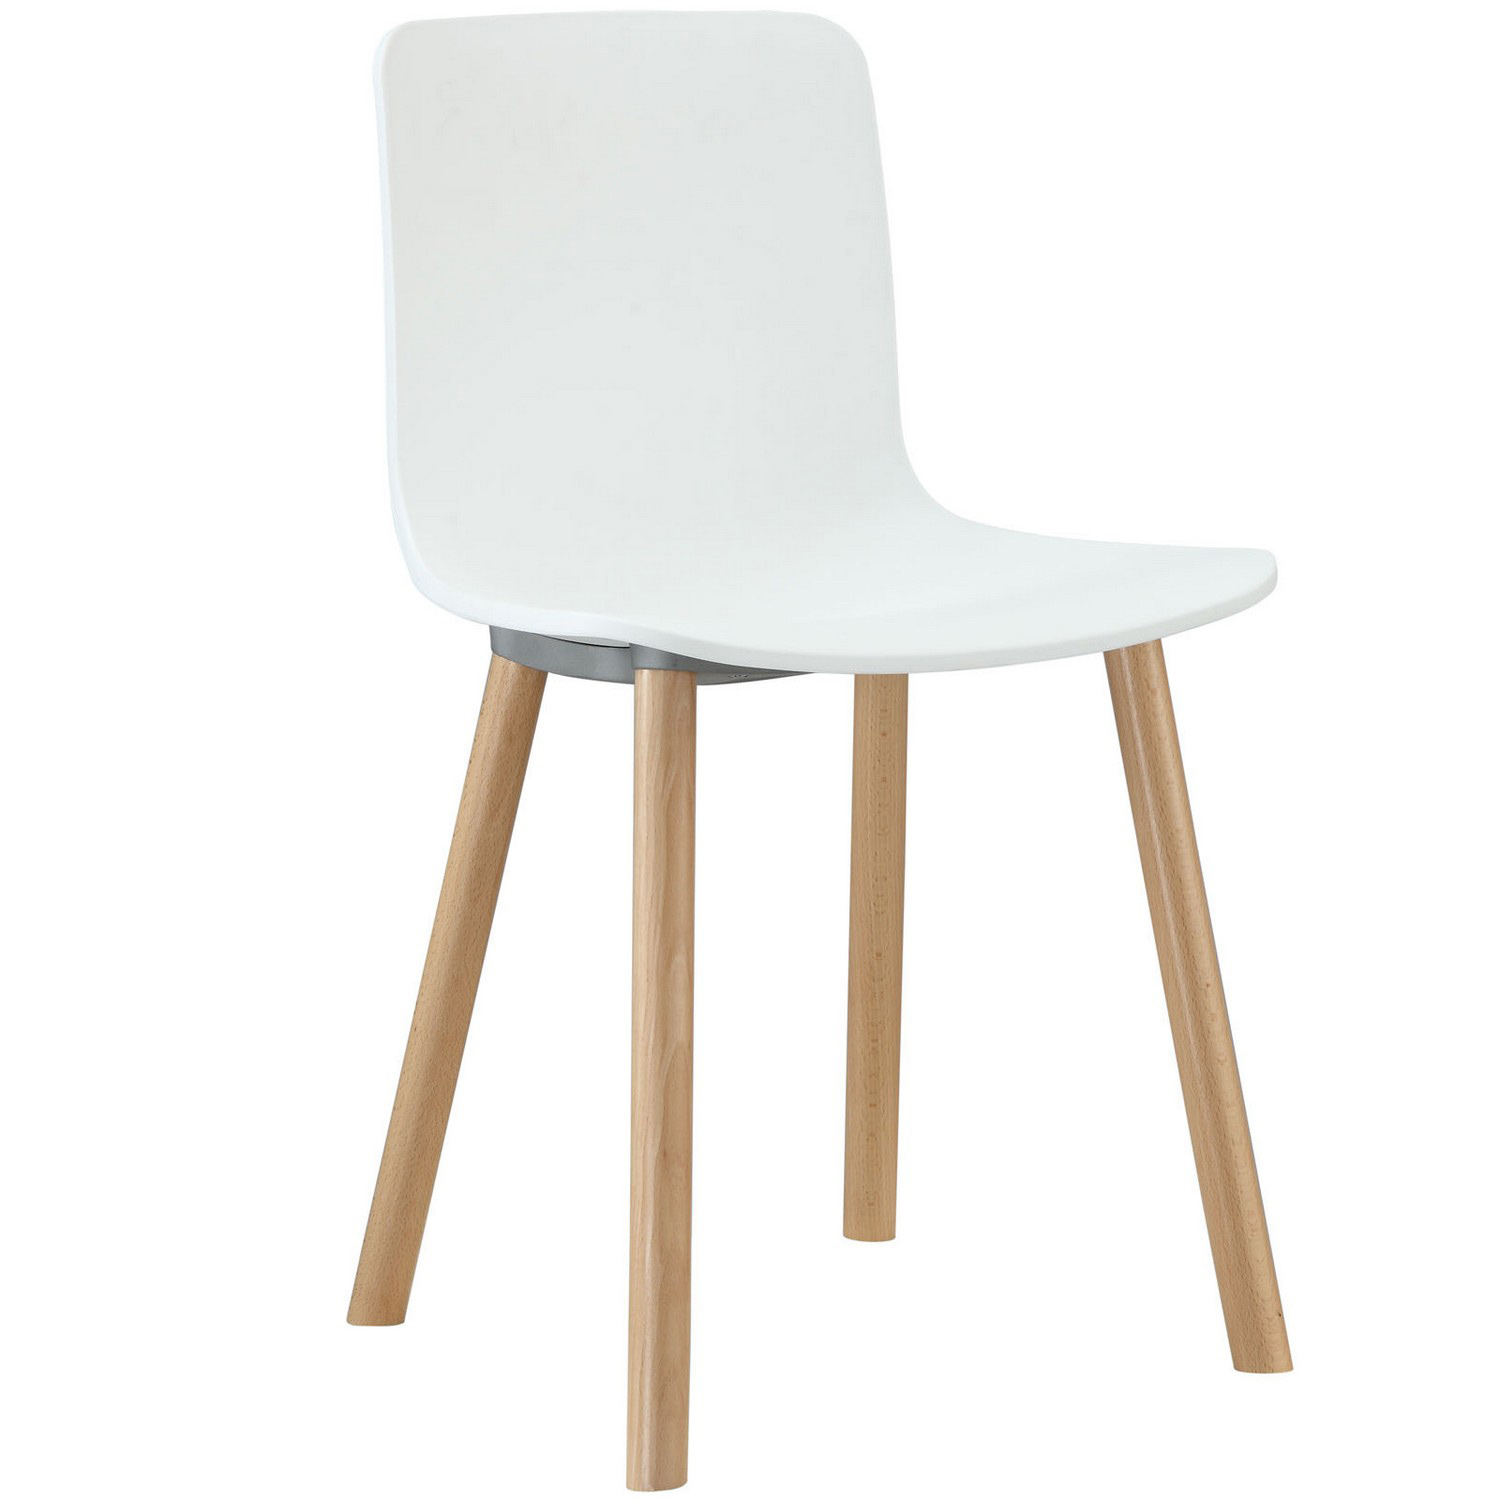 Modway Sprung Dining Side Chair - White